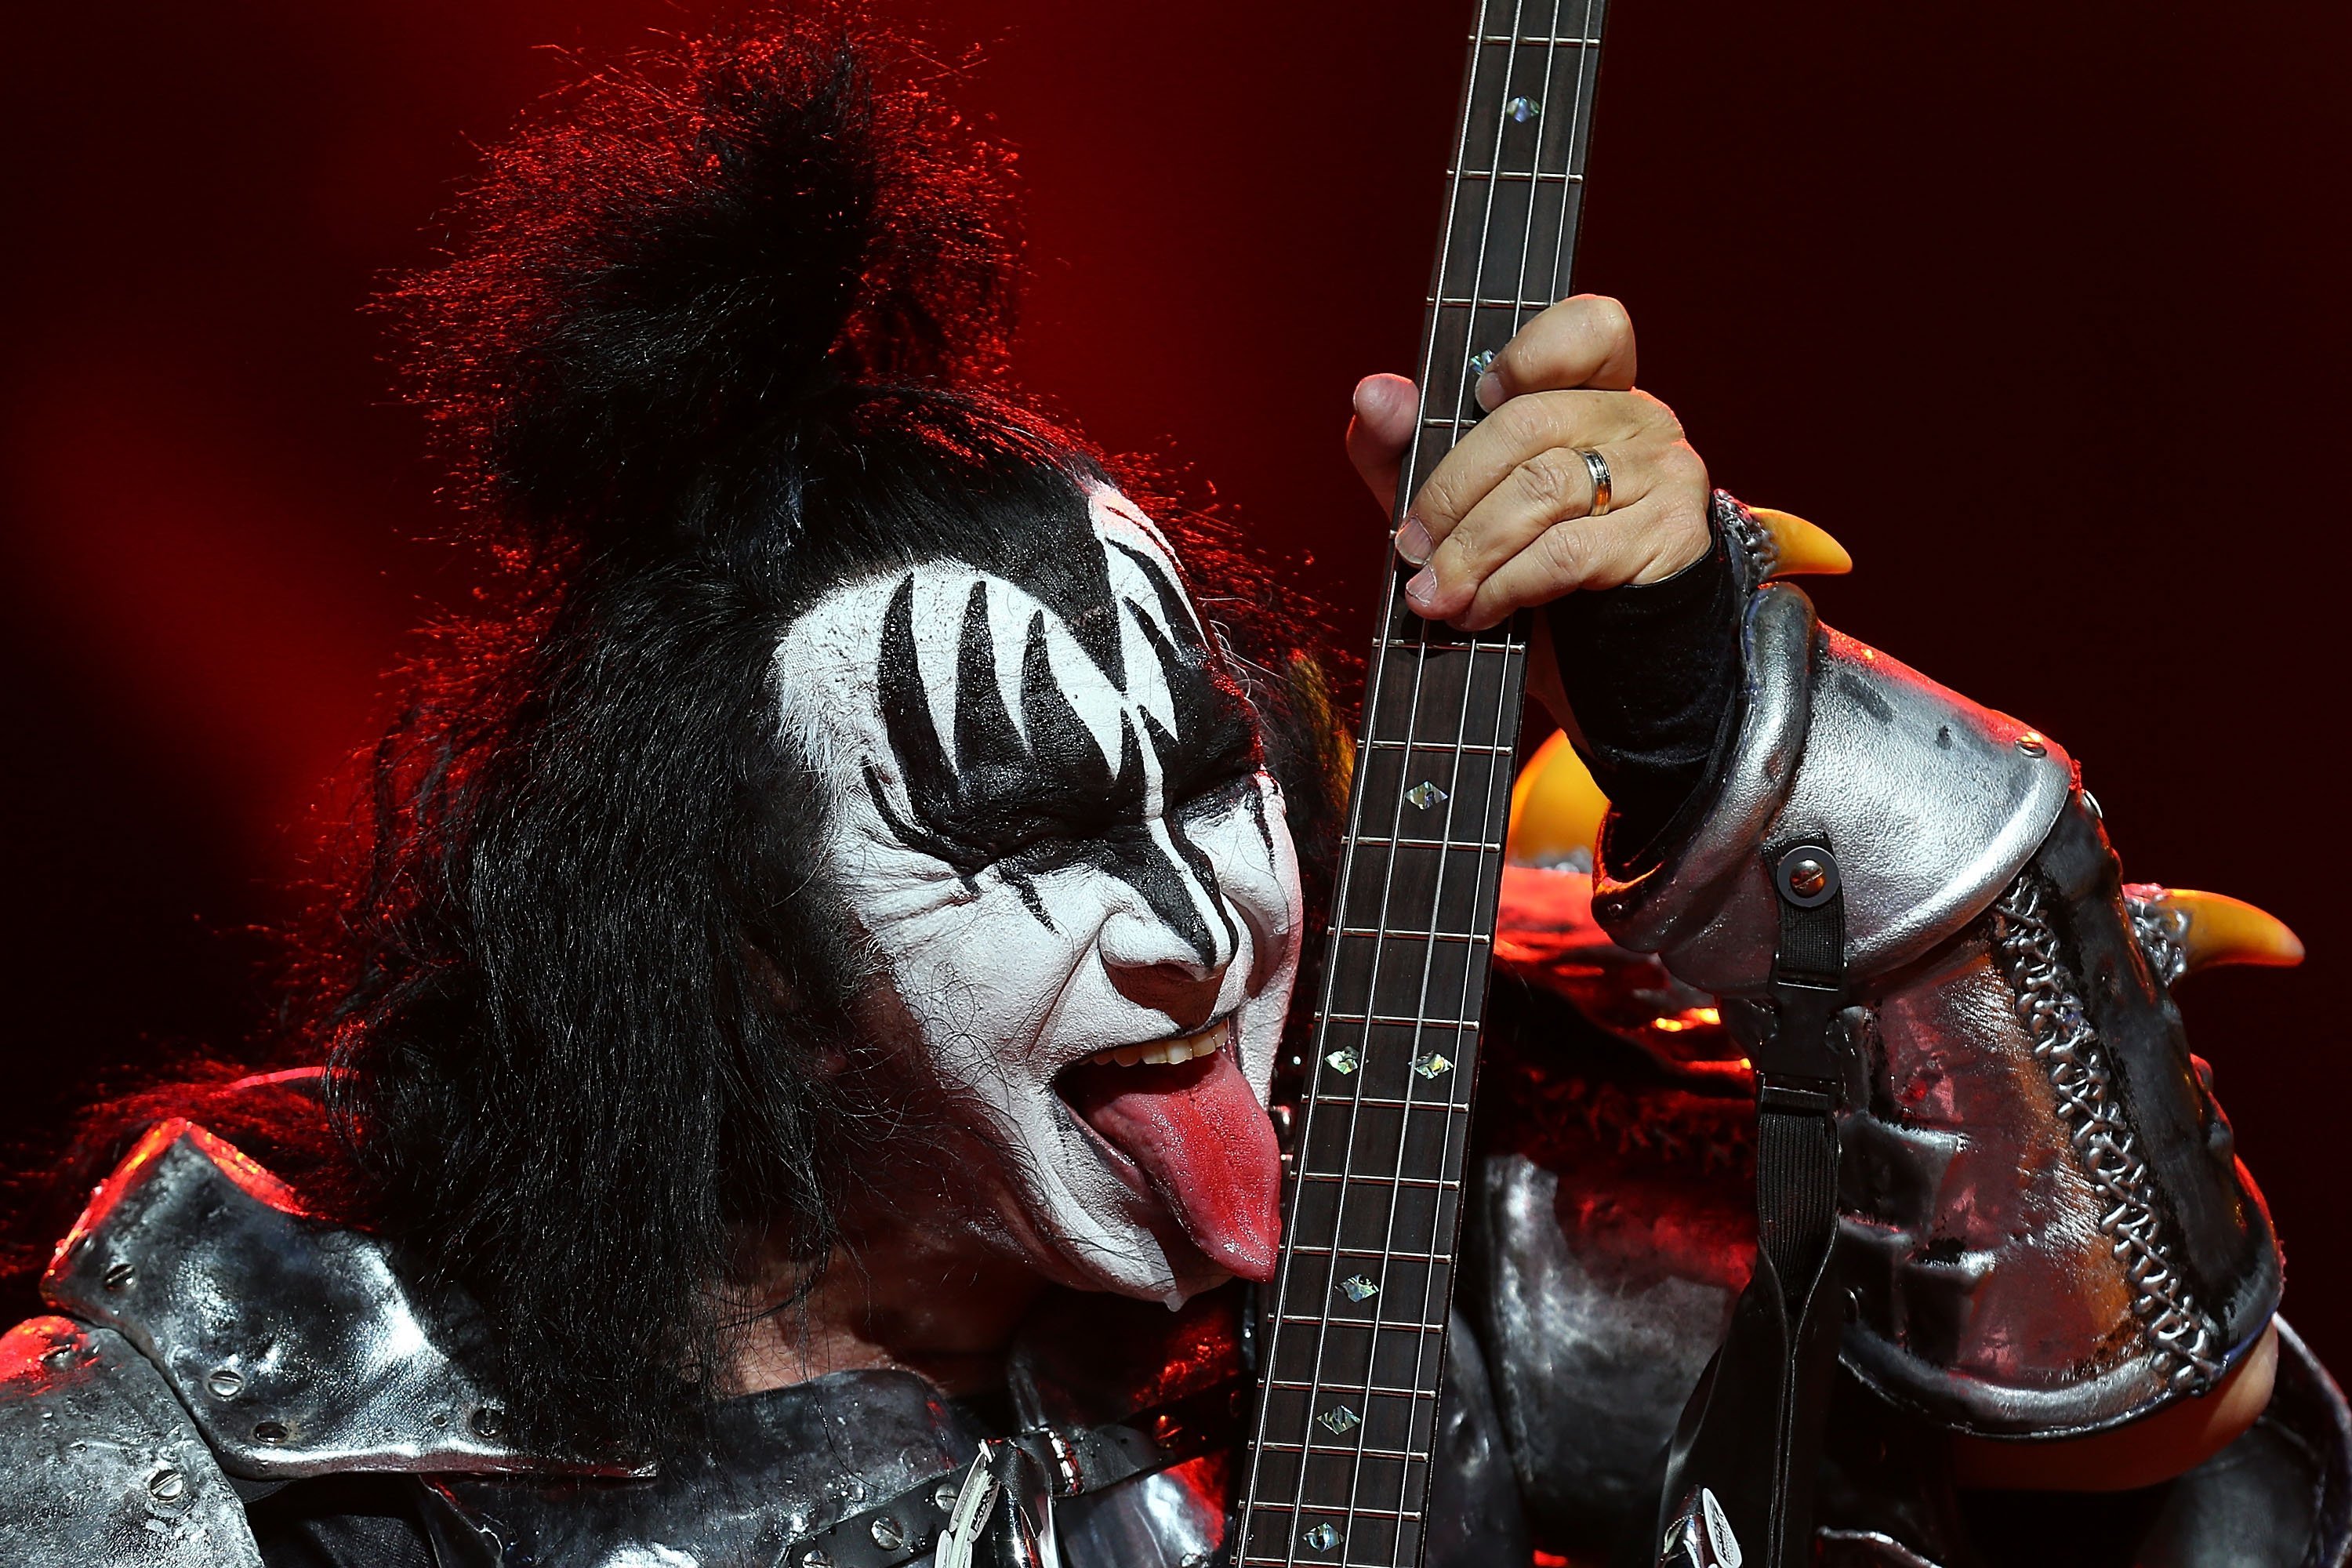 Gene Simmons of KISS performs live on stage for their Monster Tour at Perth Arena on February 28, 2013 in Australia | Photo: Getty Images